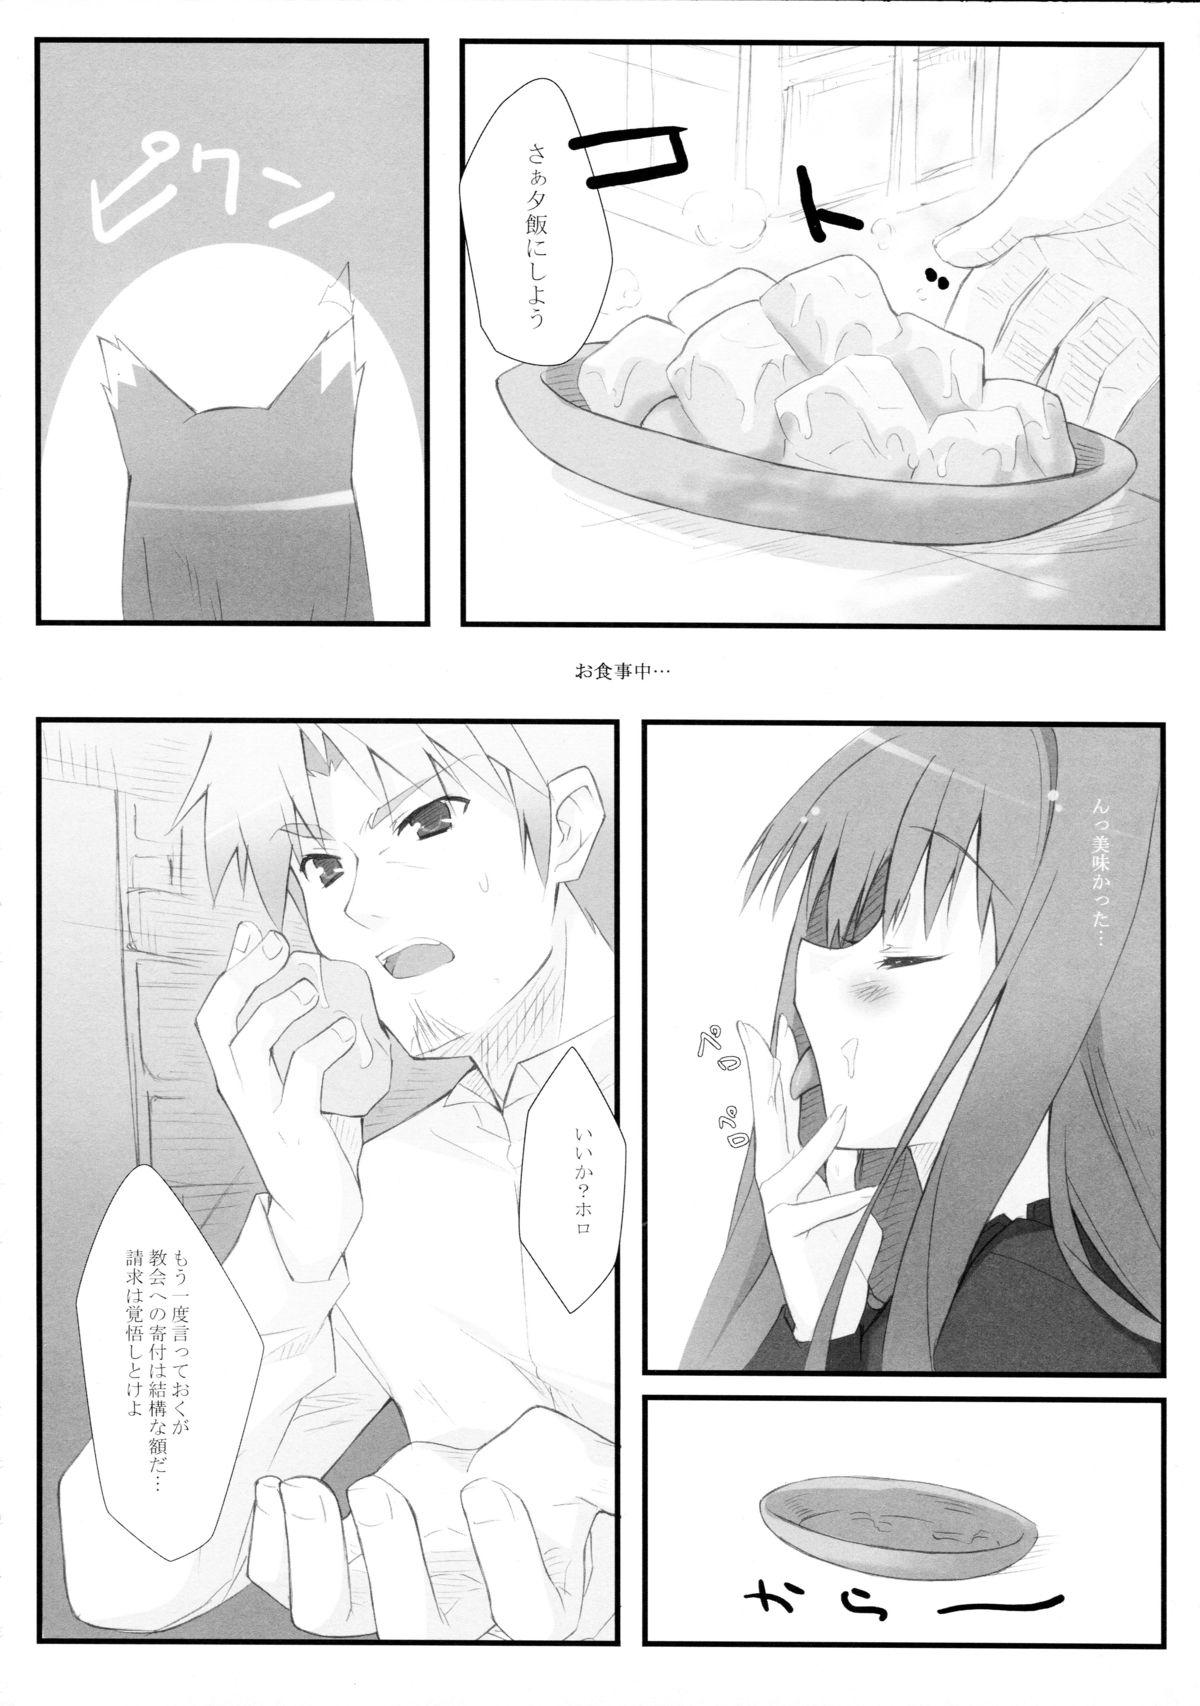 Doctor Sex Komugi to Hito to Ookami to - Spice and wolf Dorm - Page 4